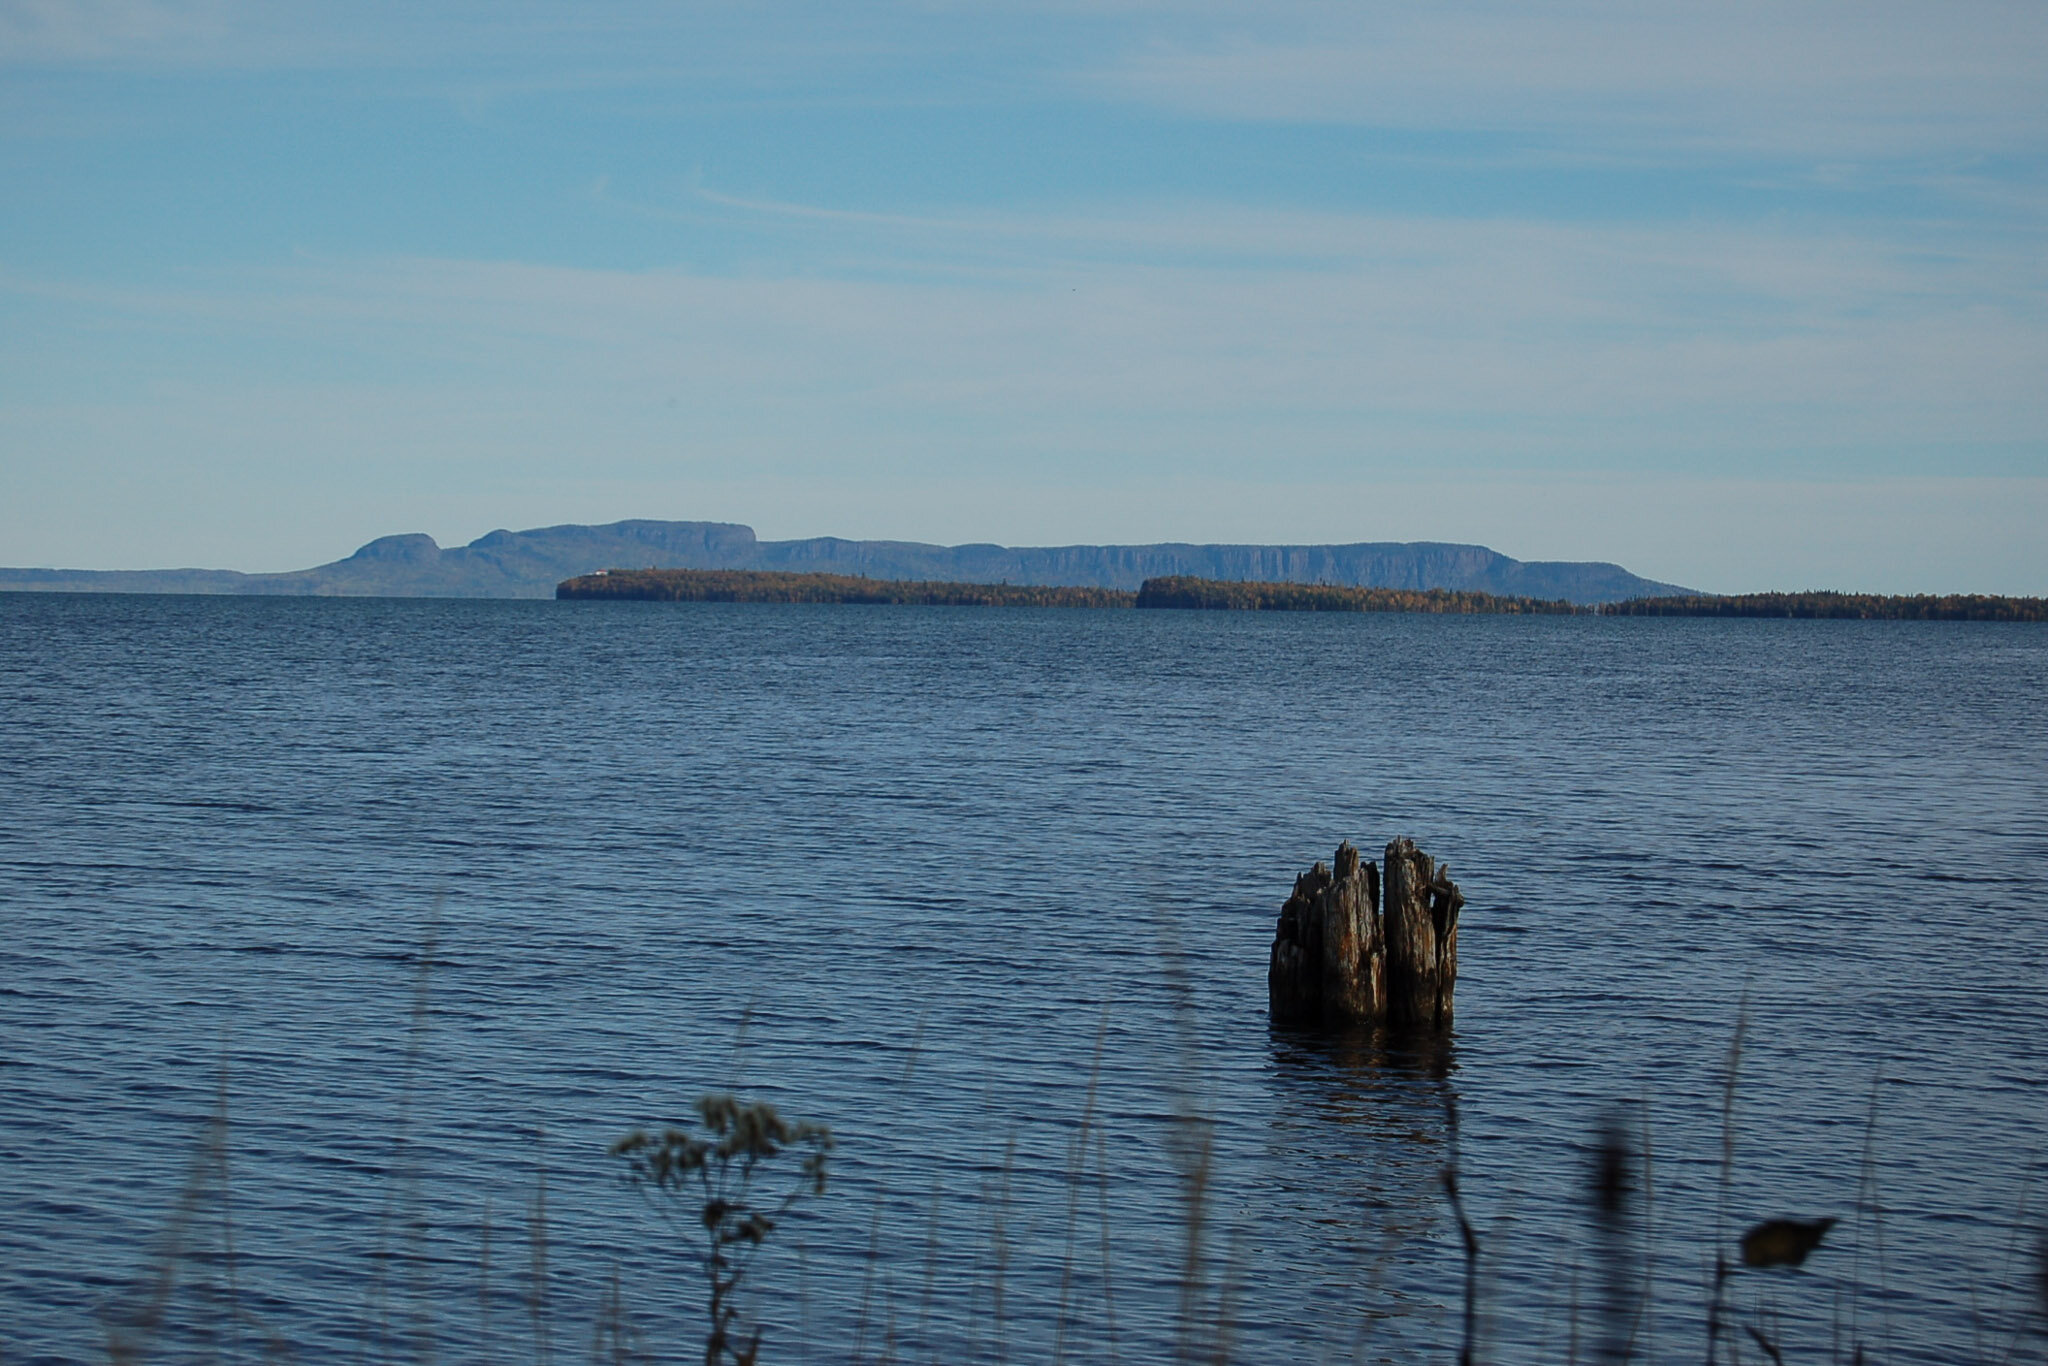  The Sleeping Giant from Mission Marsh Conservation Area in Thunder Bay, Ont. 